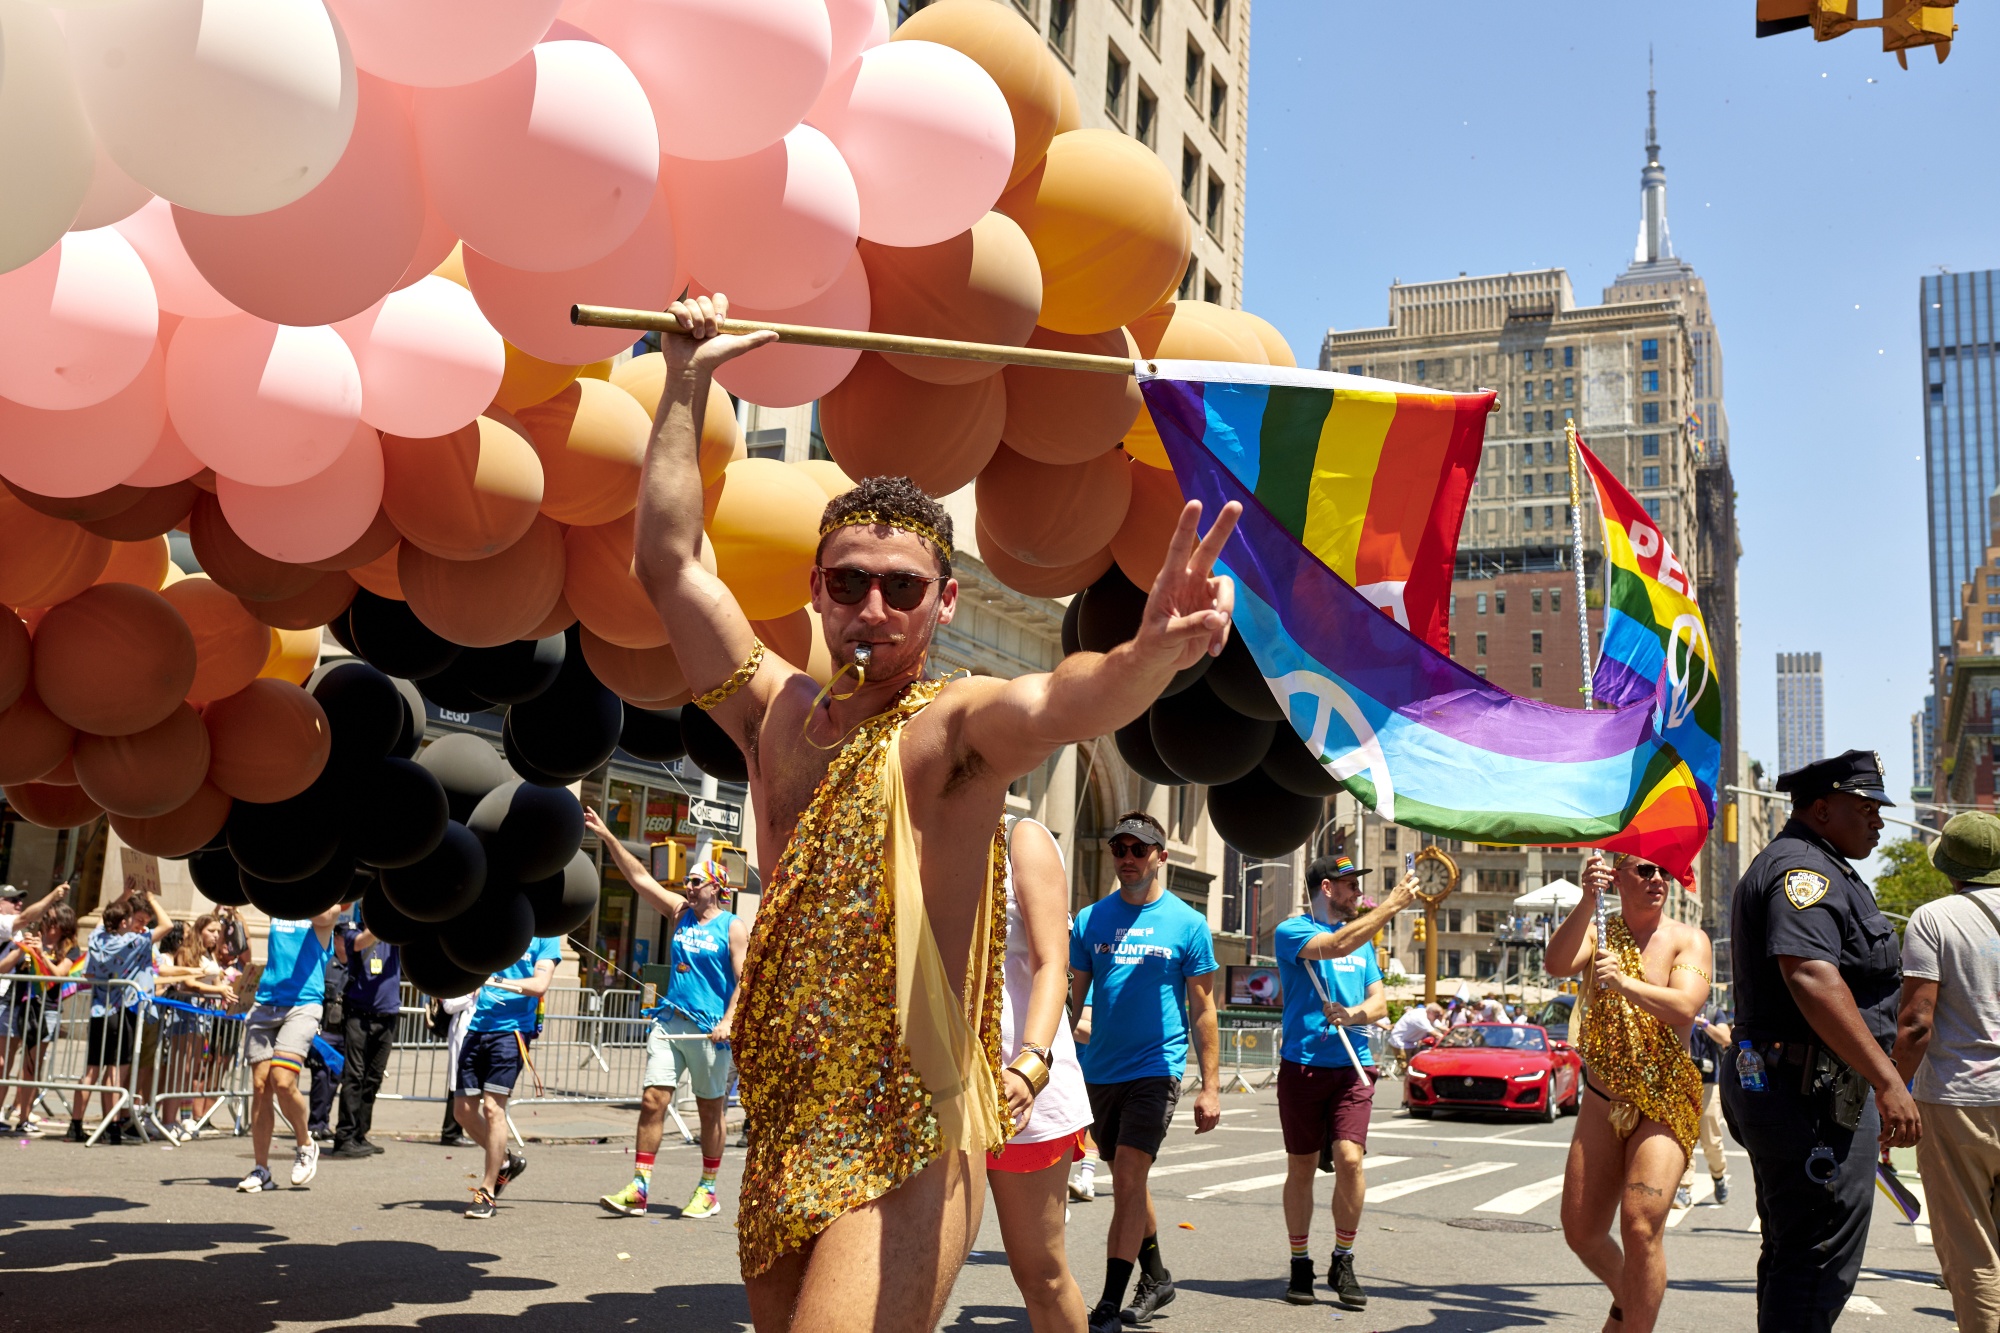 Gay pride events proliferate, but Yankees remain a holdout